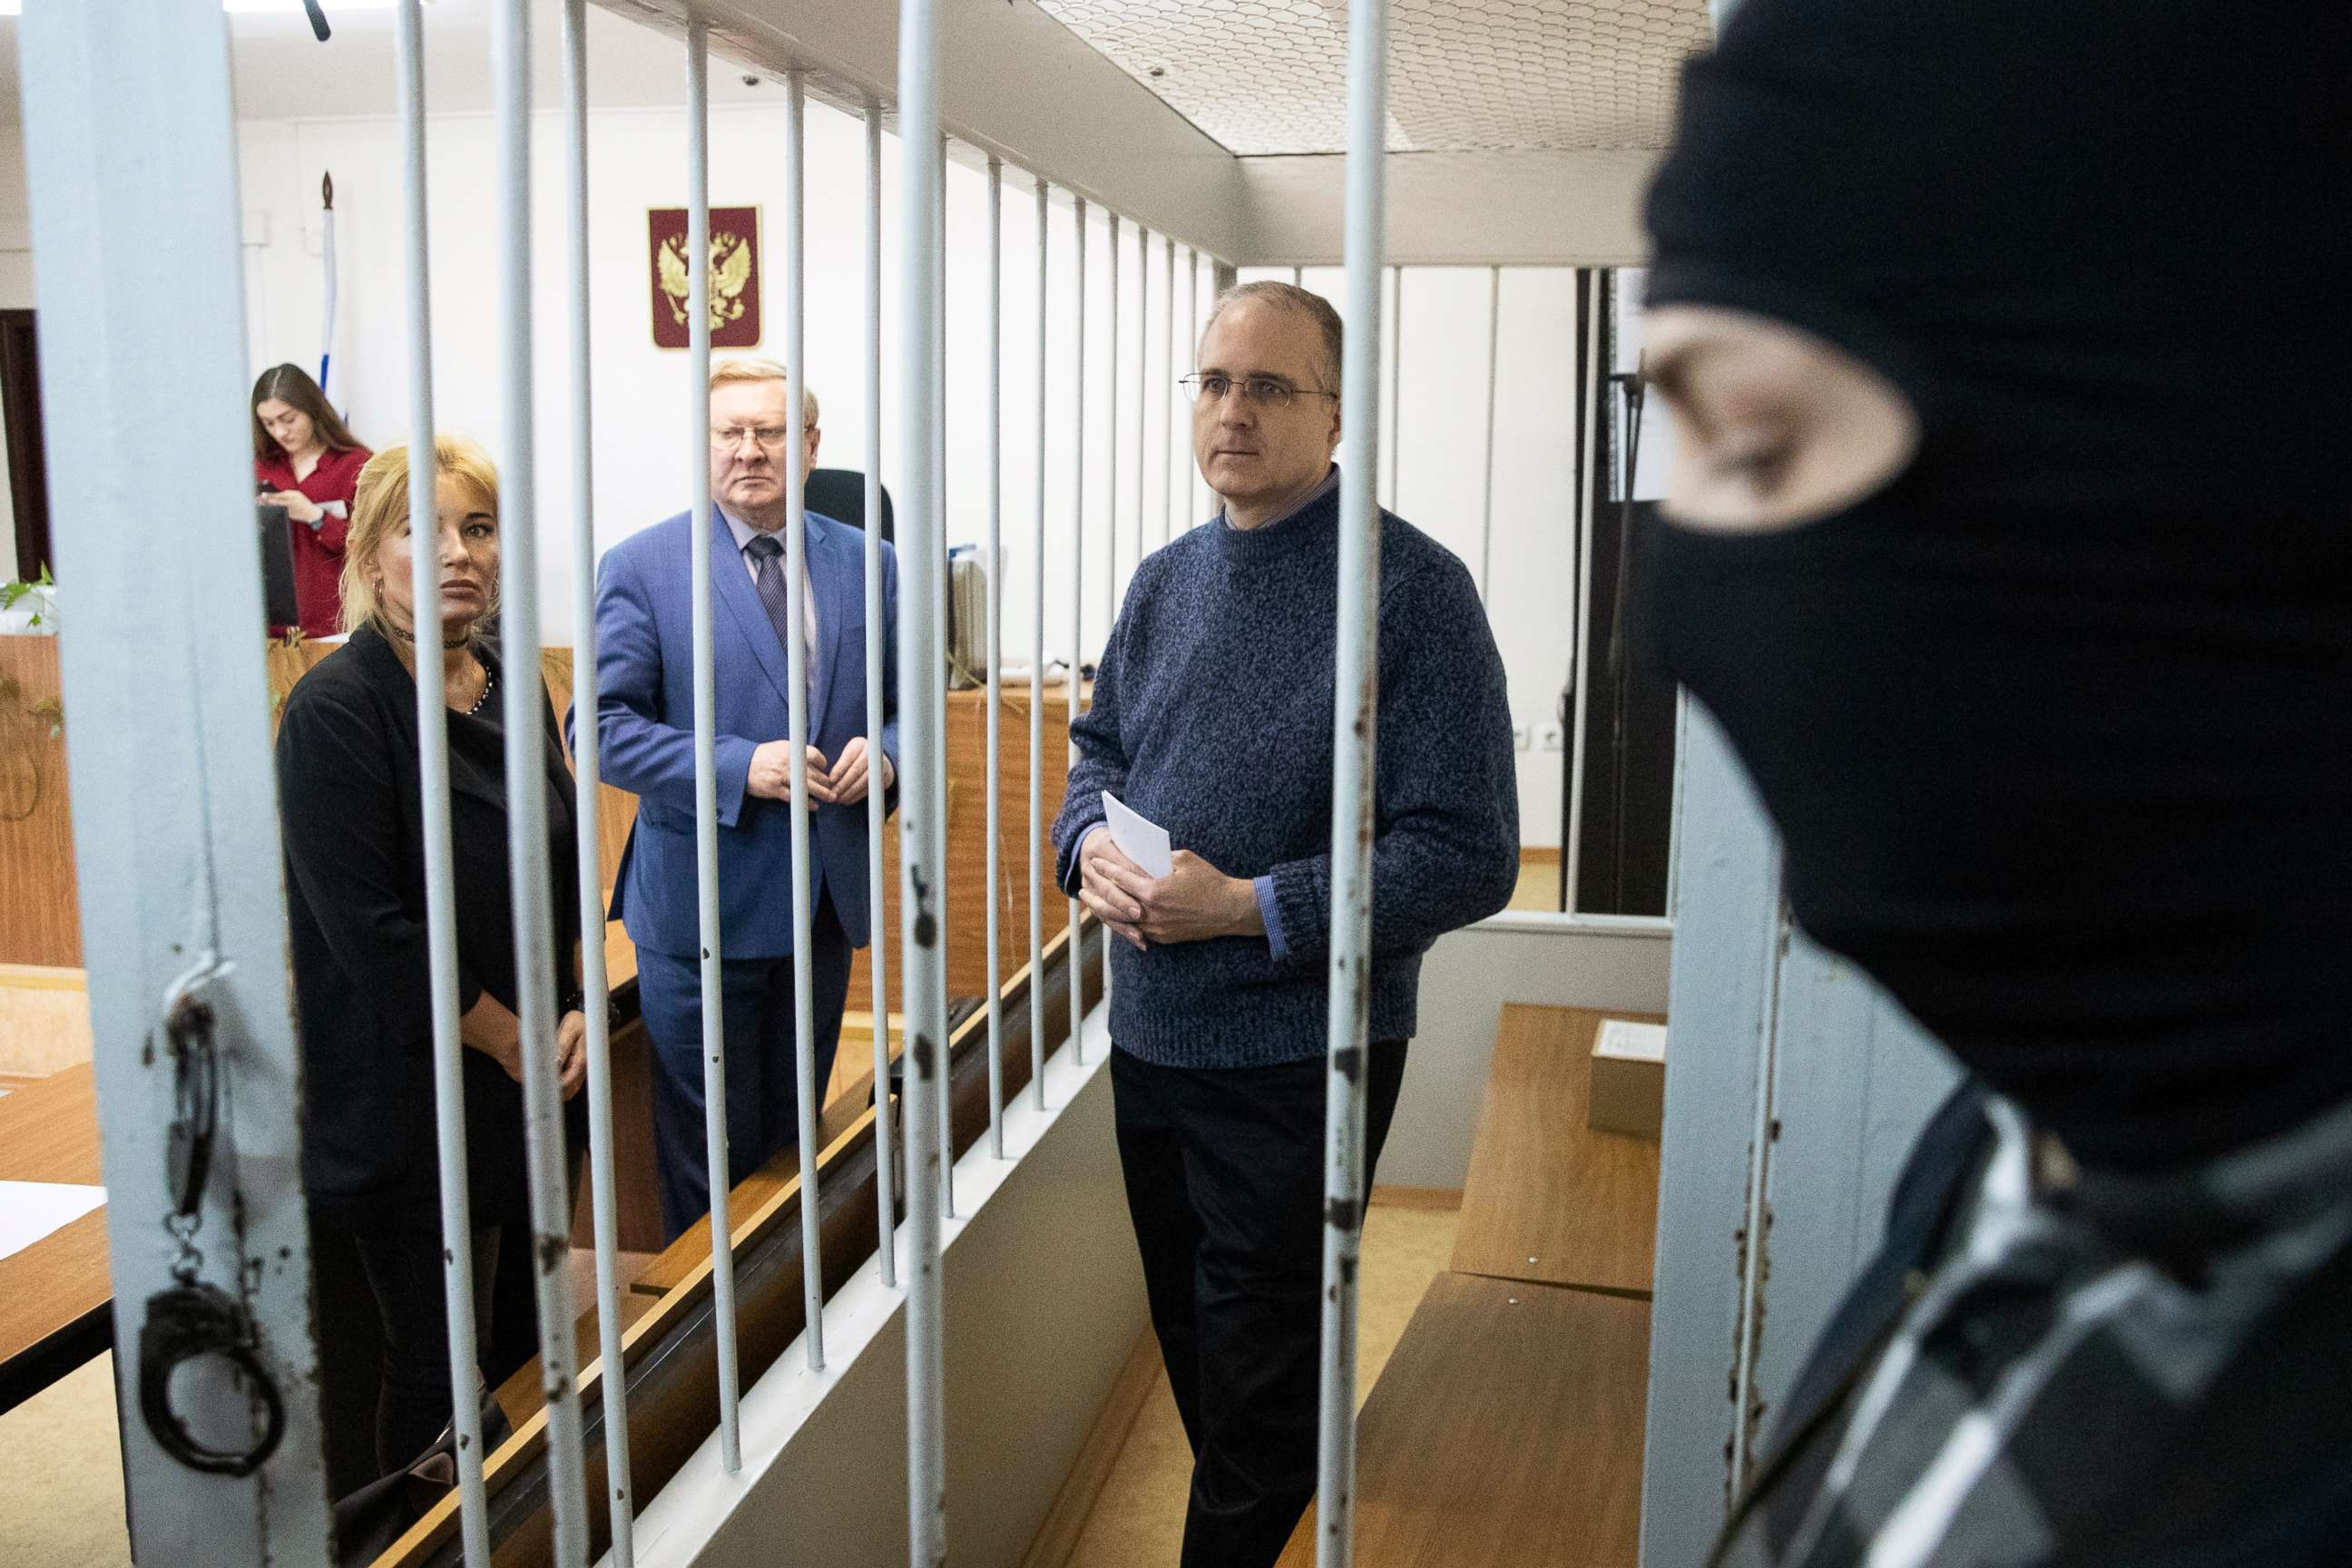 PHOTO: Paul Whelan, a former U.S. Marine who was arrested for alleged spying in Moscow at the end of 2018, waits for a hearing in a court in Moscow, May 24, 2019.